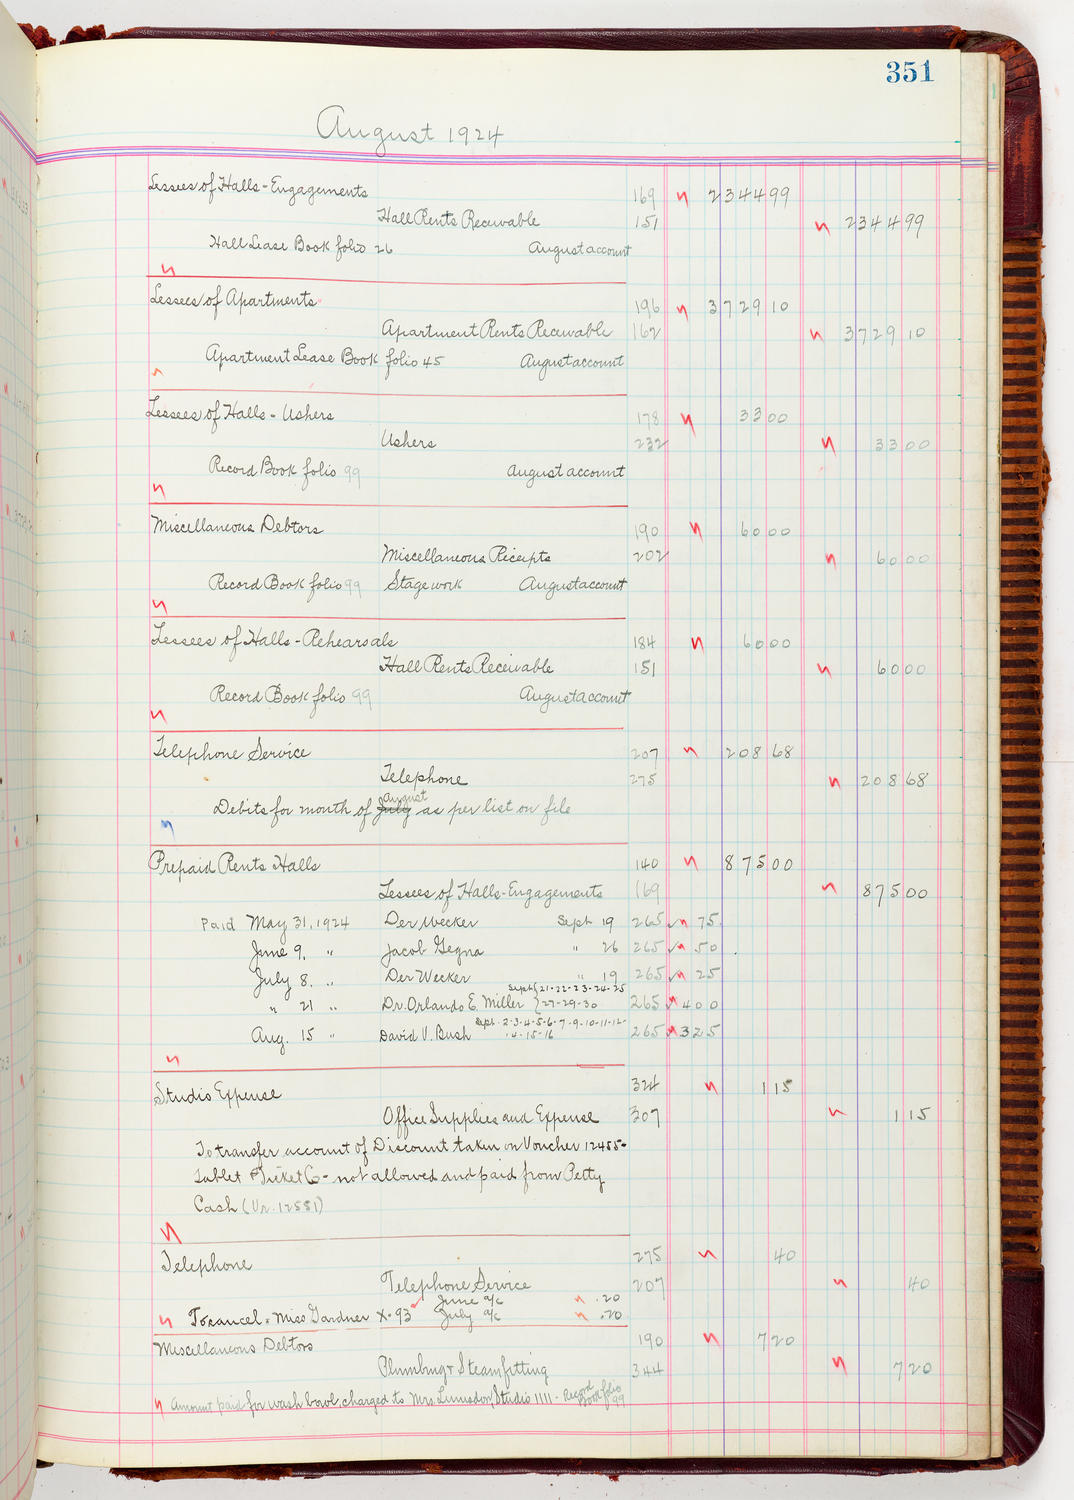 Music Hall Accounting Ledger, volume 5, page 351